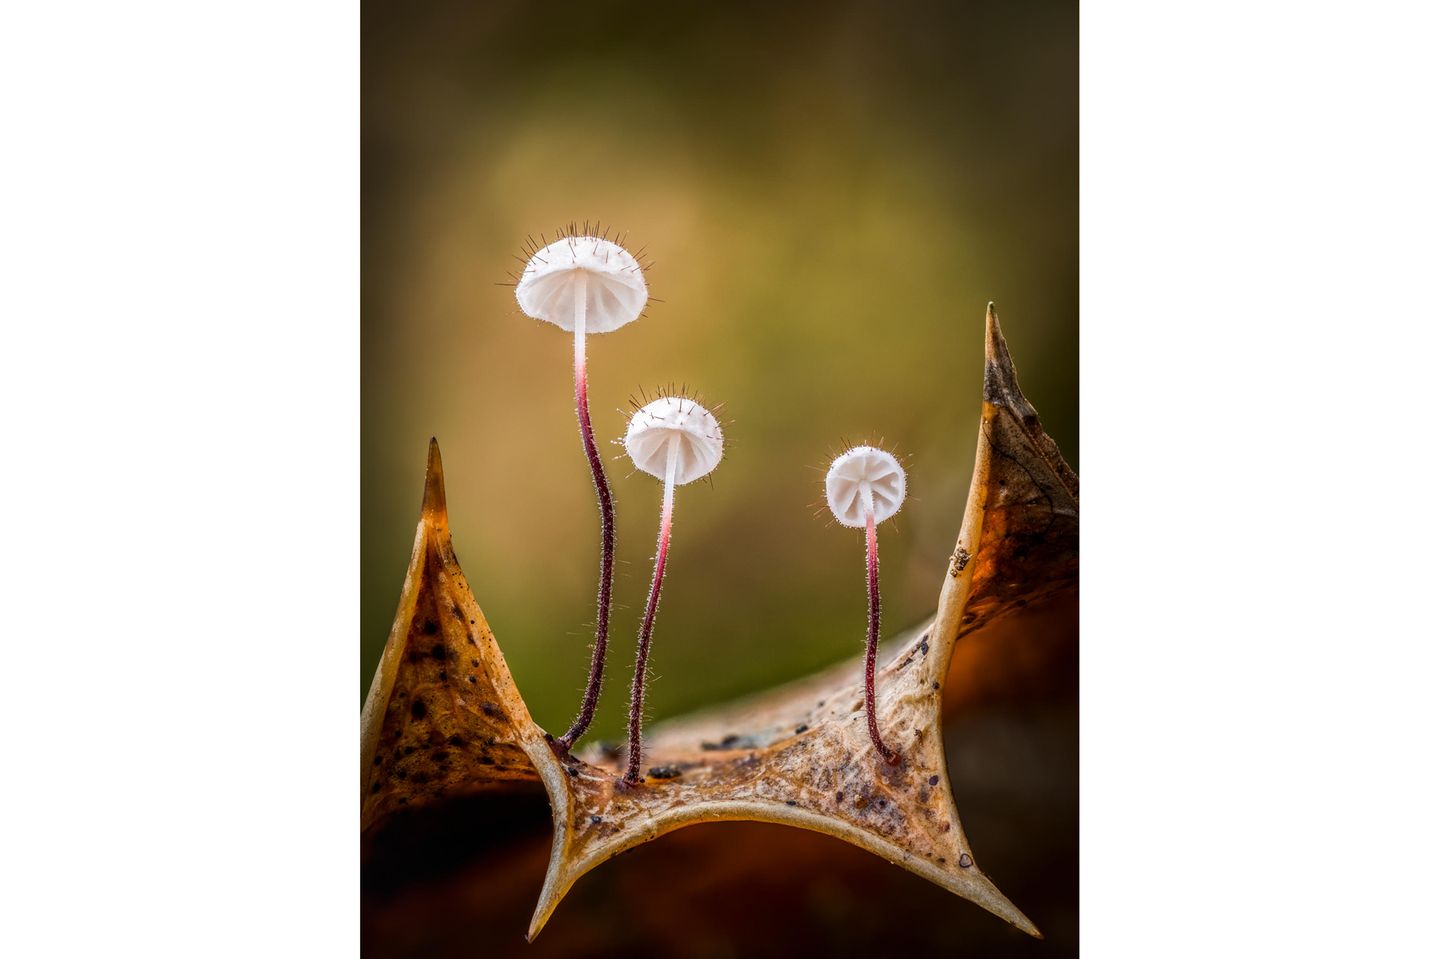 //© Barry Webb-Holly Parachutes-CUPOTY03-Plants-1st//  //CREDIT// © Barry Webb | cupoty.com  Winner: Plants & Fungi  //NAME// Barry Webb  //TITLE// Holly Parachute  Nationality British  Occupation Gardener / Photographer  Further information: Website: www.barrywebbimages.co.uk, Instagram: barrywebbimages      Barry:  ‘Last December, while cutting the hedge in my garden, I spotted what I thought were slime moulds, growing on this dead holly leaf. On closer inspection, I noticed amazing spikes coming out of the cap of these small, rare, Holly Parachute fungi, Marasmius hudsonii. I took the holly leaf into my greenhouse, out of the wind, and then spent some time carefully arranging moss behind, to create a pleasant background. I deliberately chose a composition using the pointed edges of the holly leaf as a frame and to echo the spikes of the little fungi. This is a 42 shot focus stack, combined in Zerene Stacker.’      Technical details:  Olympus OMD E-M1 Mark II, Olympus M.Zuiko Digital ED 60mm f/2.8 Macro, ISO 200, 1/10sec at f/4  Accessories: Gitzo Explorer tripod and cable release  Post processing: Zerene Stacker and basic adjustments in Lightroom and Photoshop